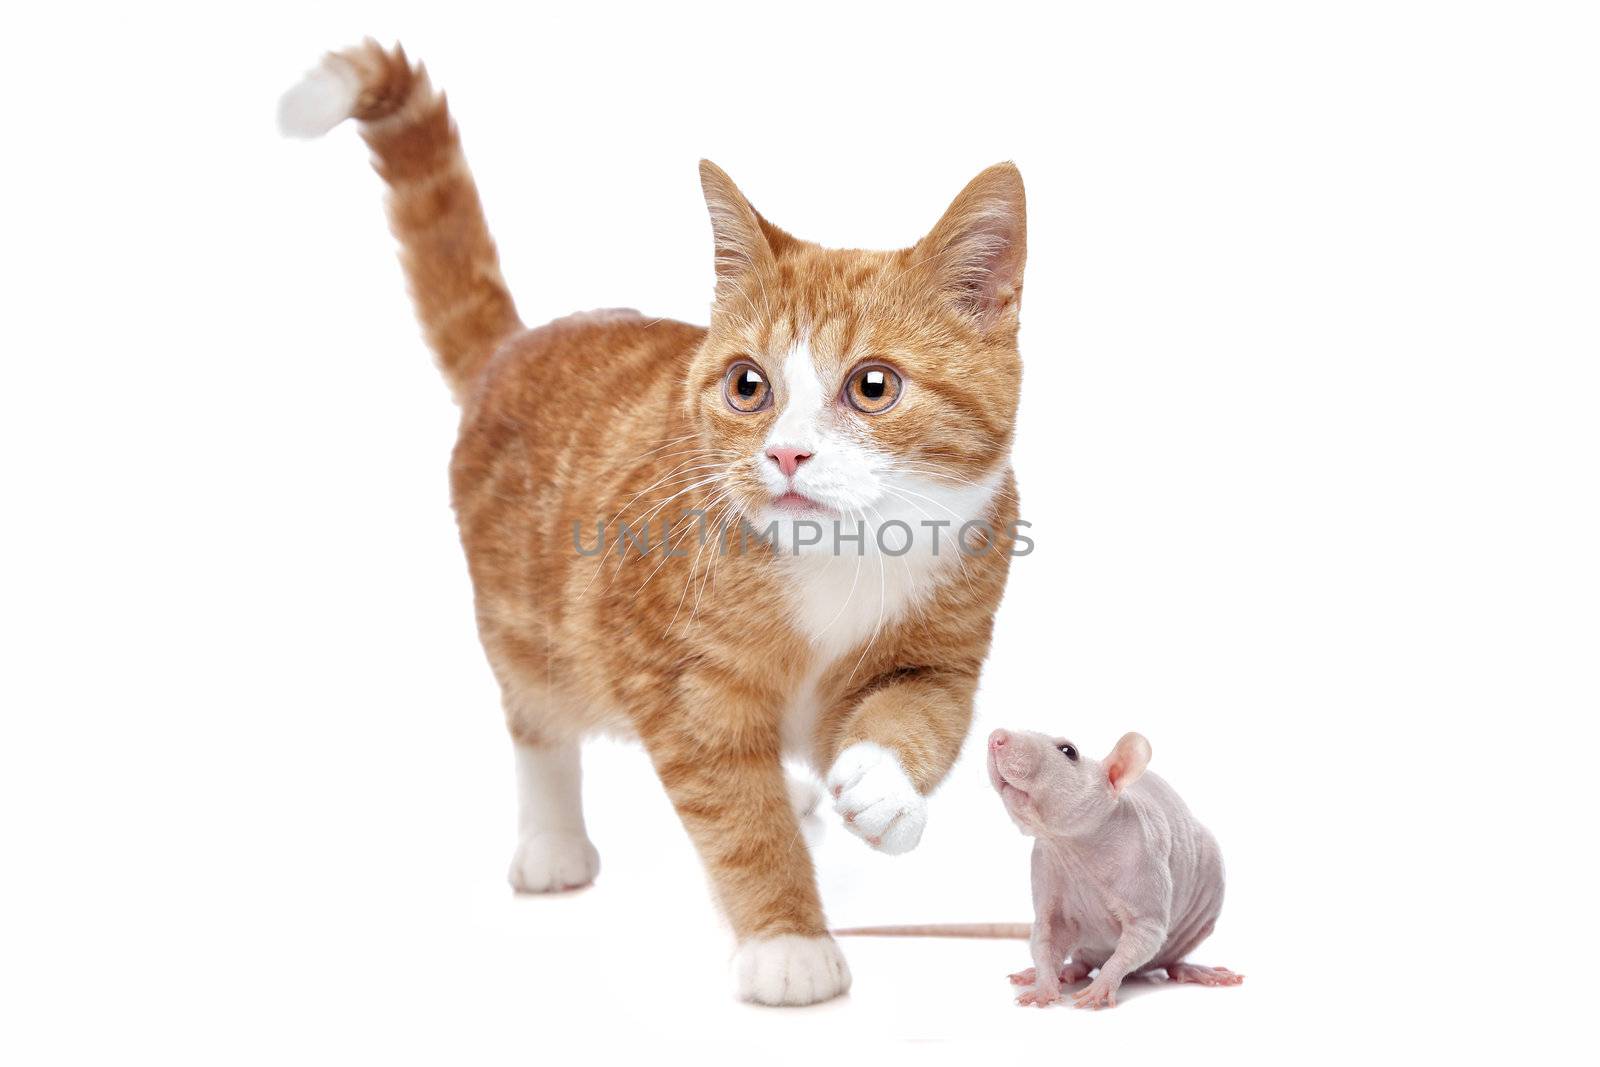 Cat and Rat by eriklam